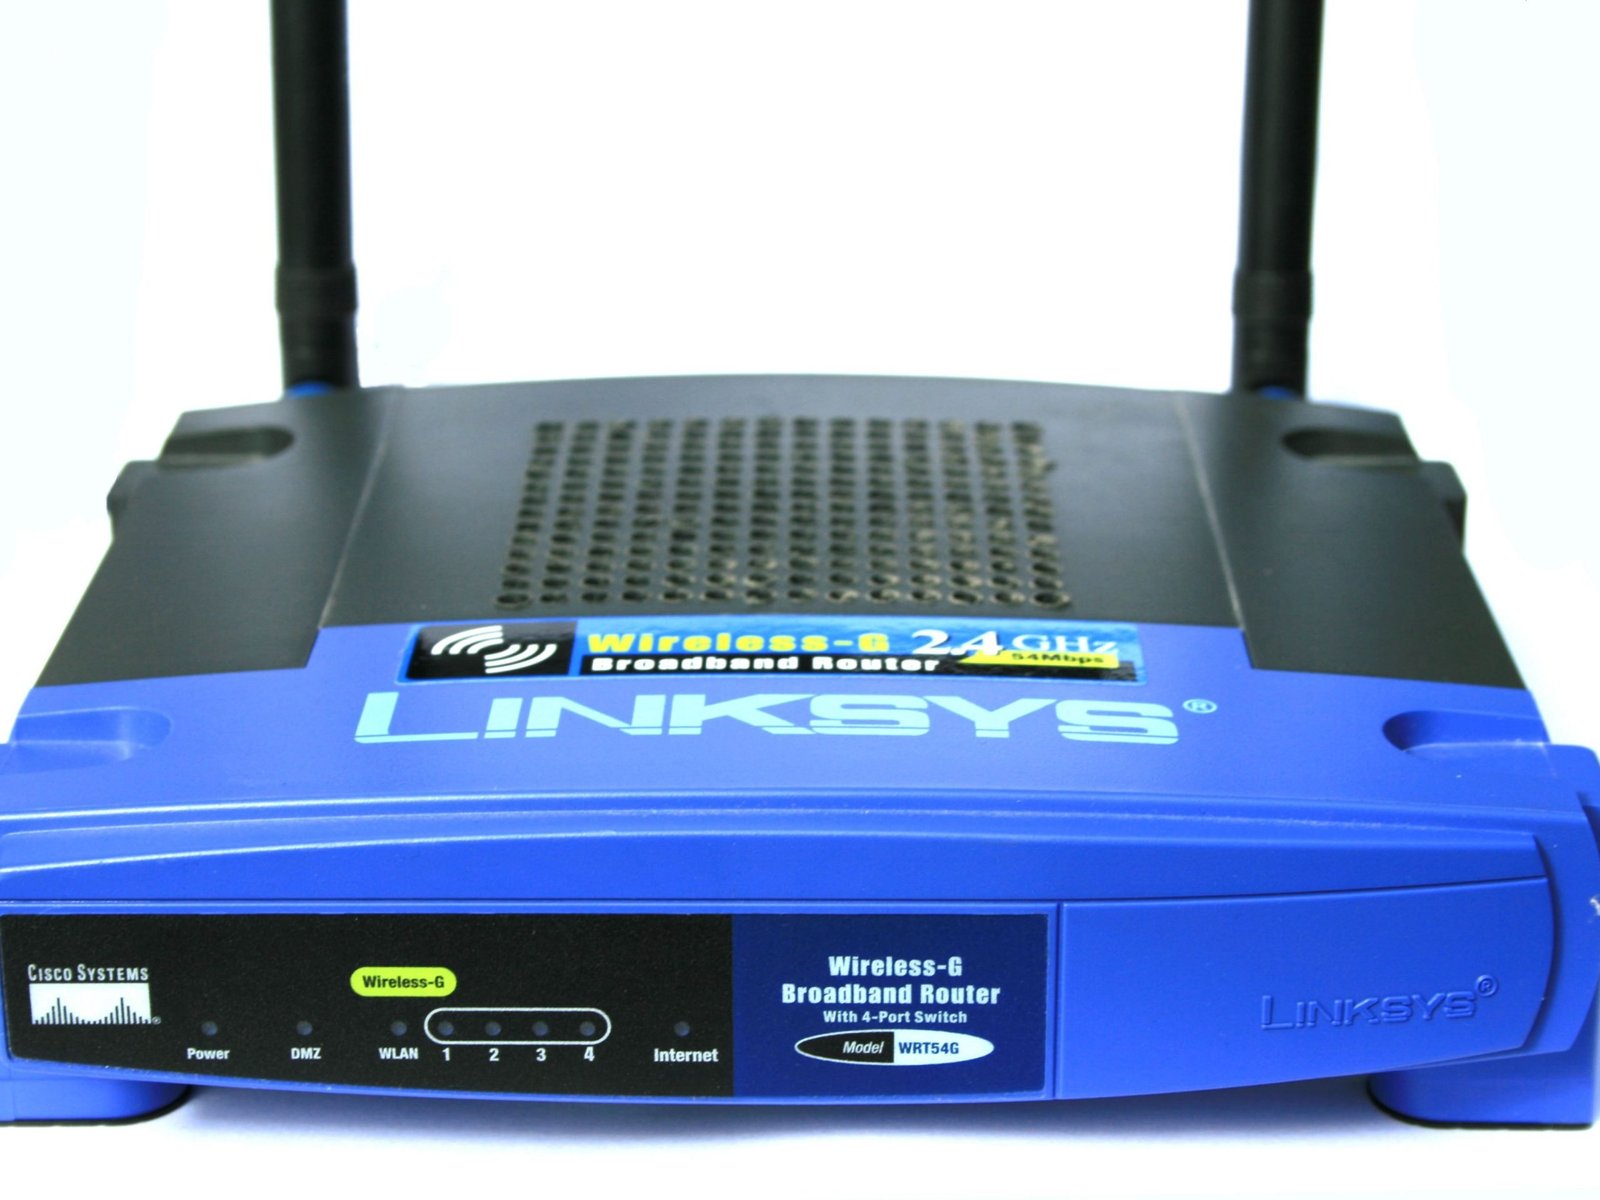 Embedded Linux example wireless router